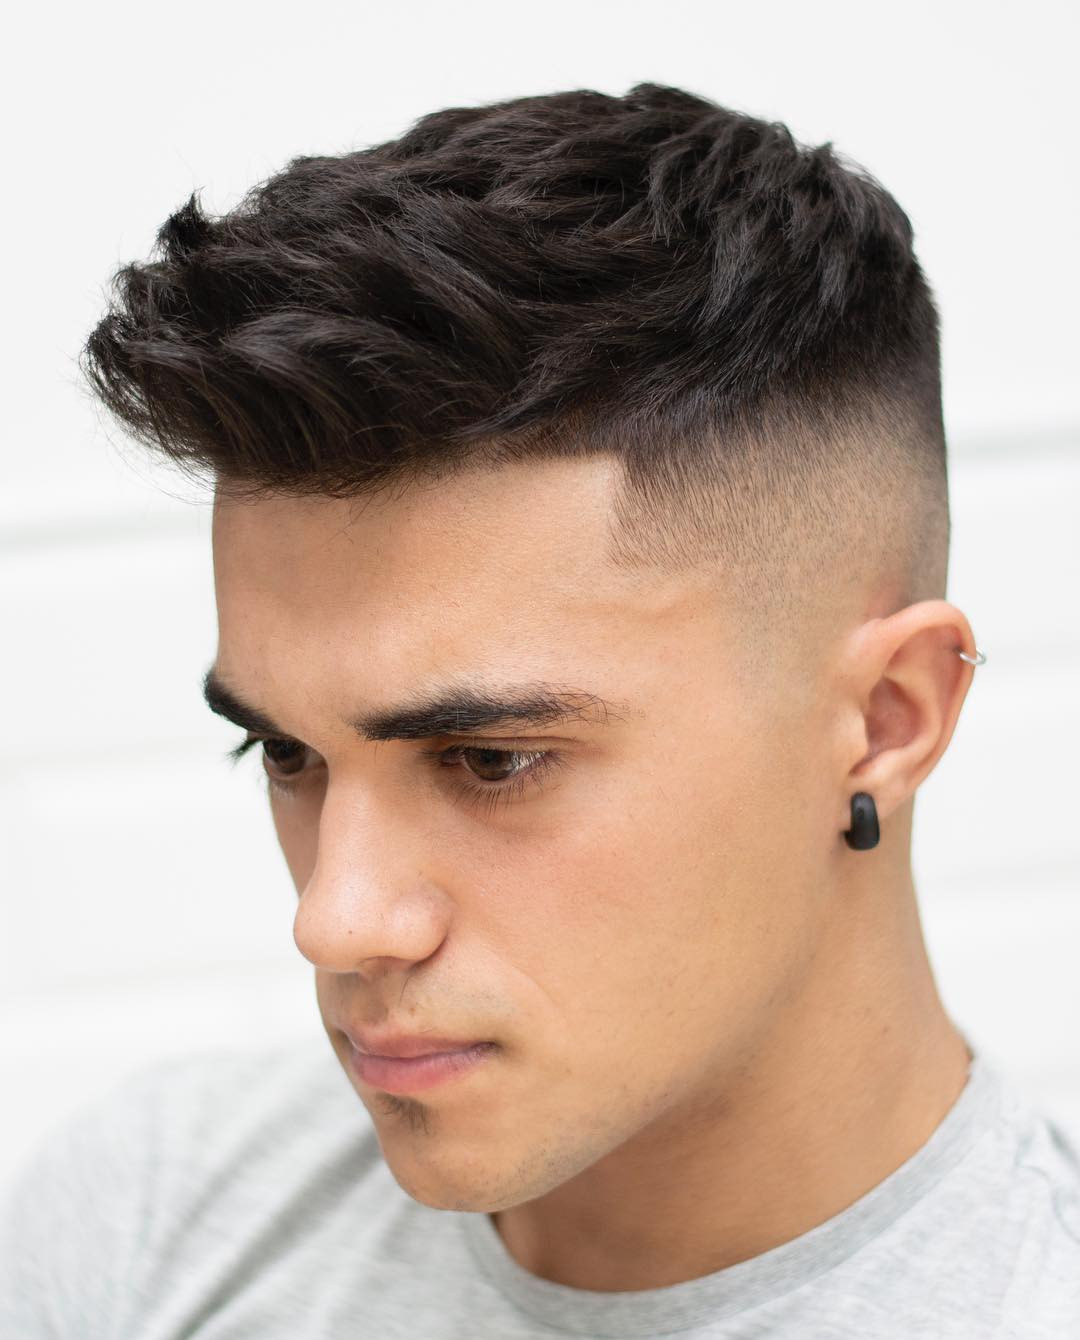 Cool Short Haircuts For Boys
 15 Teen Boy Haircuts That Are Super Cool Stylish For 2020